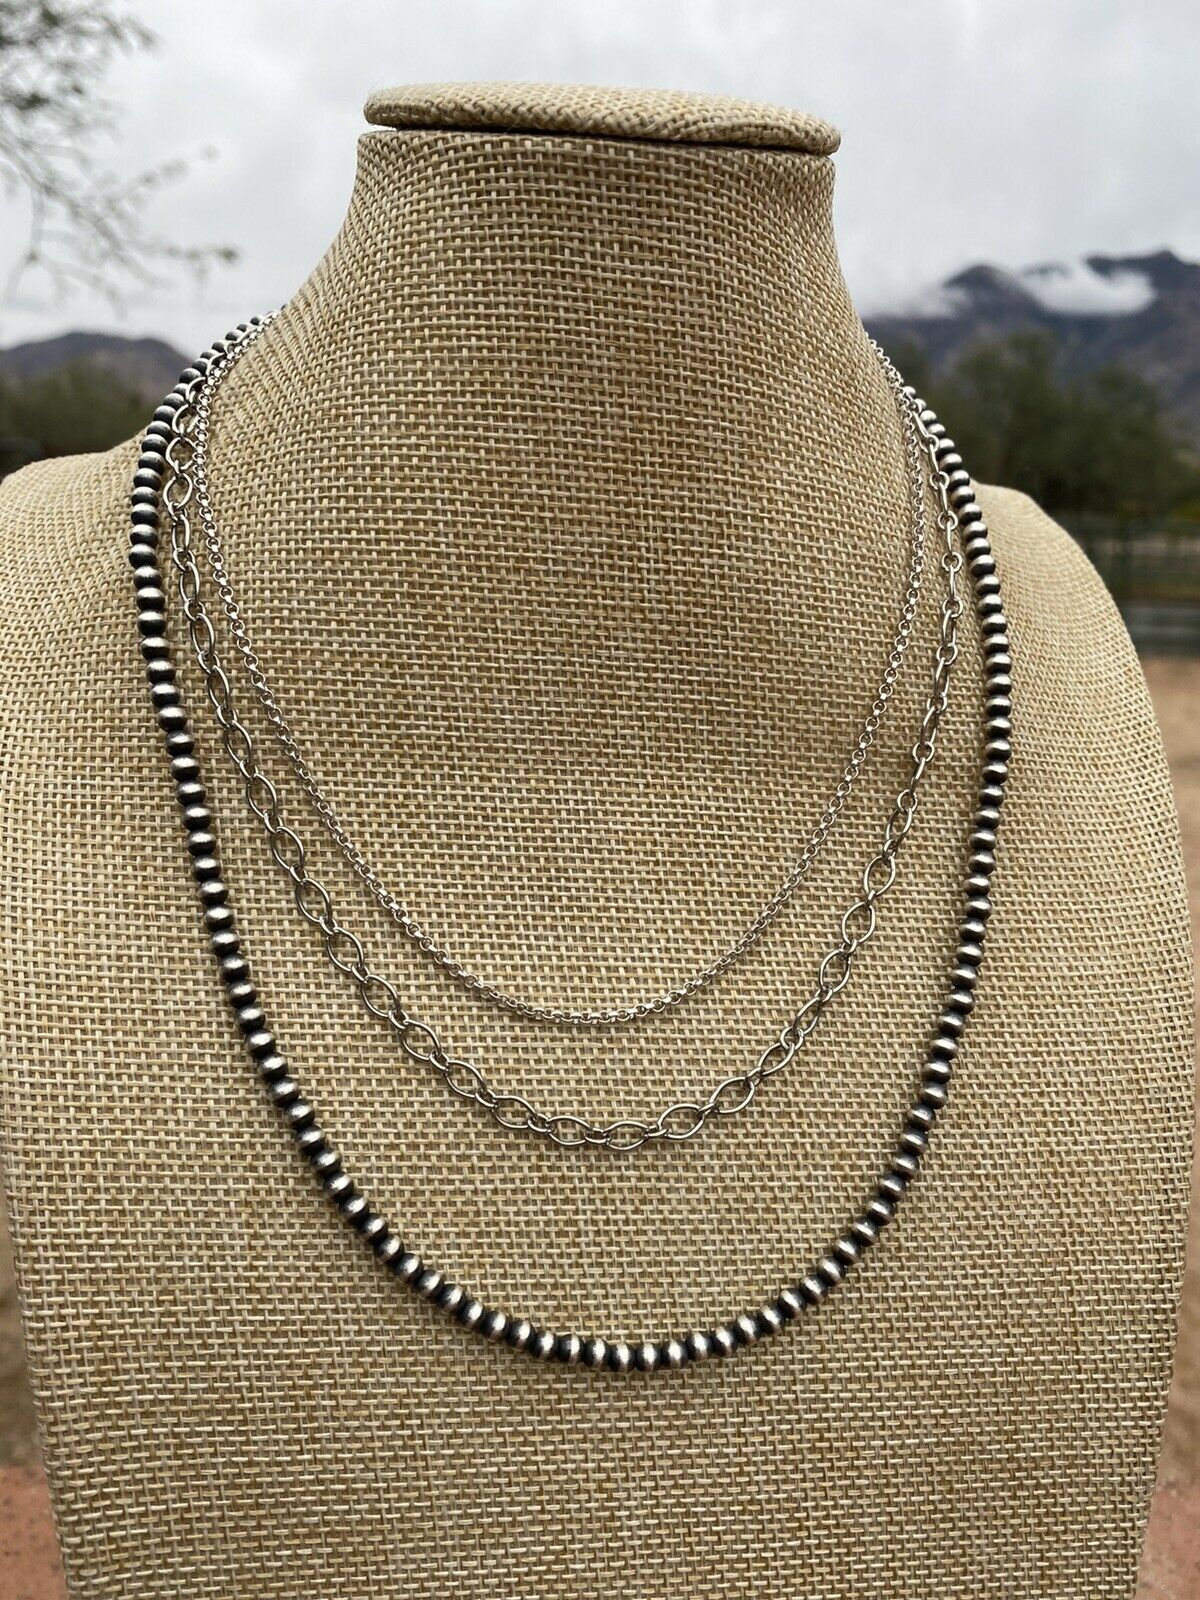 Navajo 3 Strand Sterling Silver Navajo Pearl & Chain  Necklace 16-20 Inches